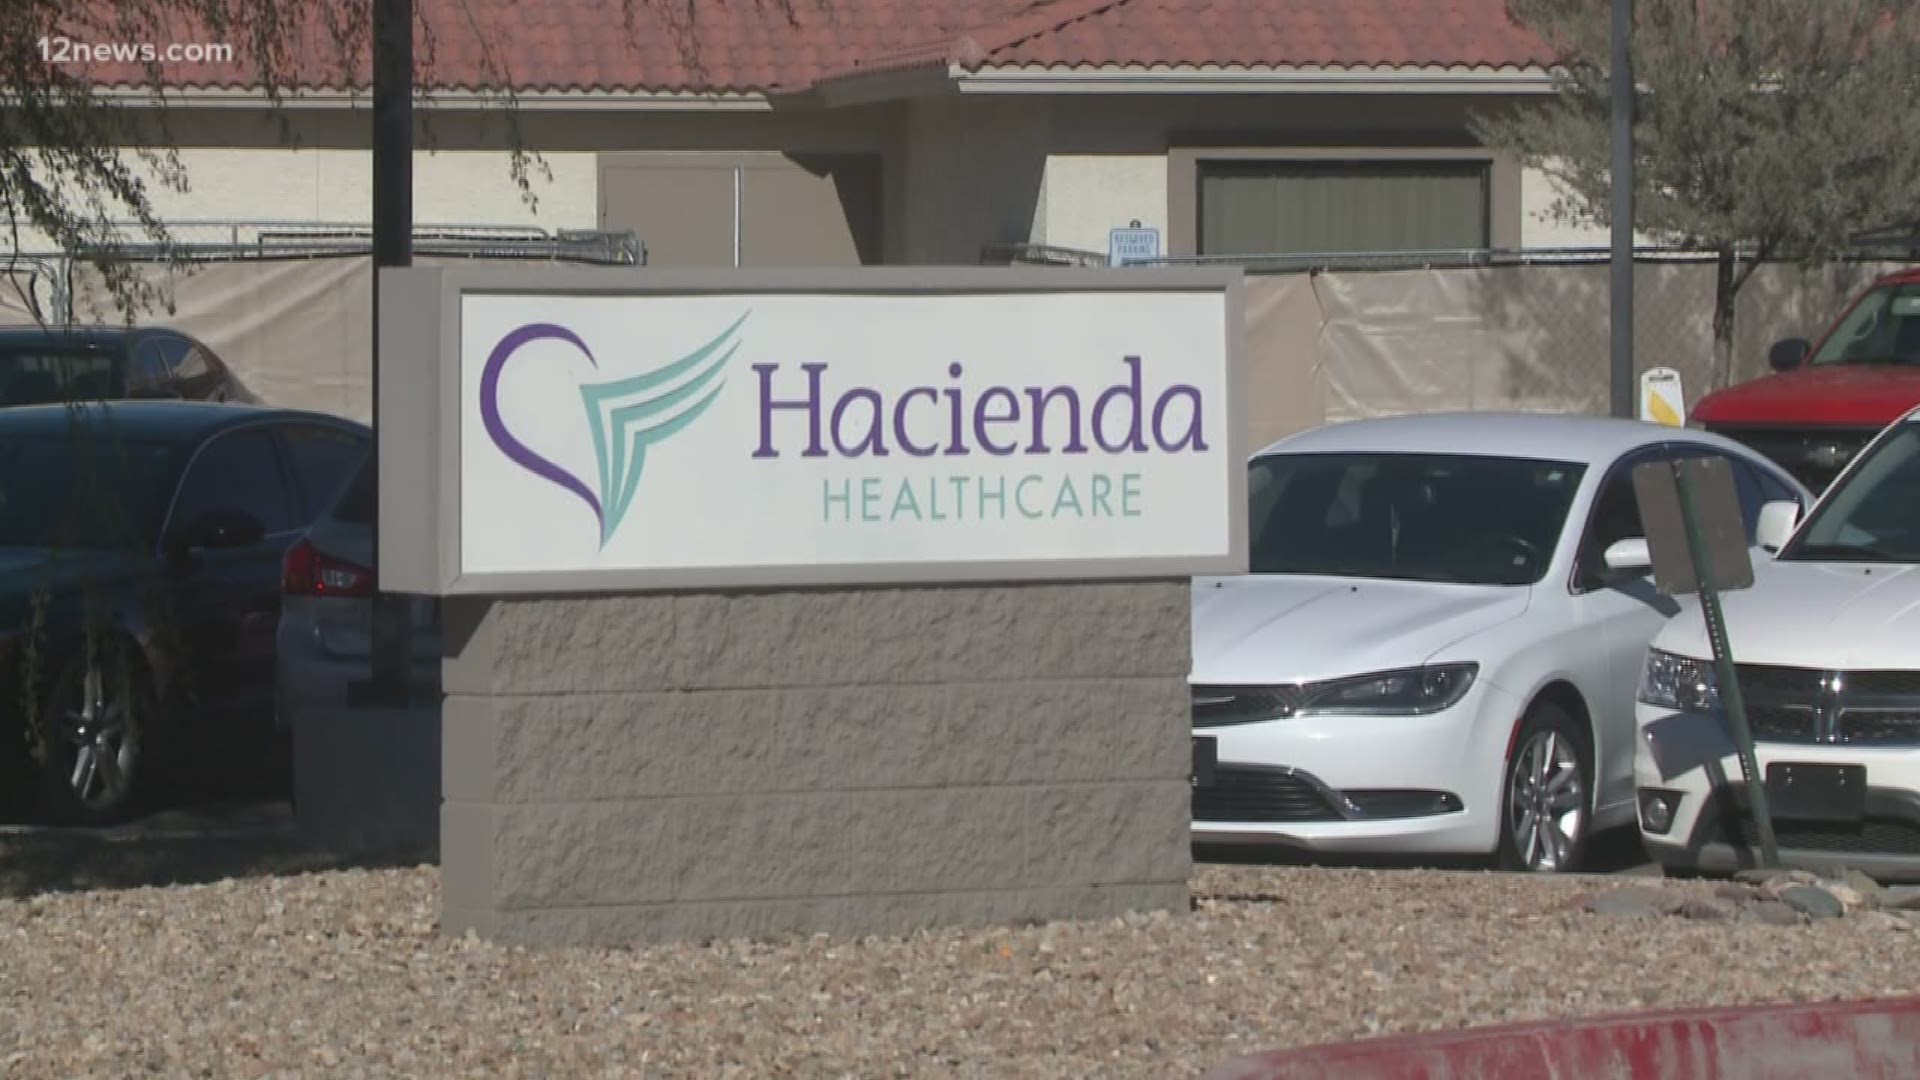 Regulators have concluded that two dozen corrective actions need to take place at Hacienda Healthcare immediately. These actions include hiring an outside manager for the facility, and pregnancy and STD tests for all patients.